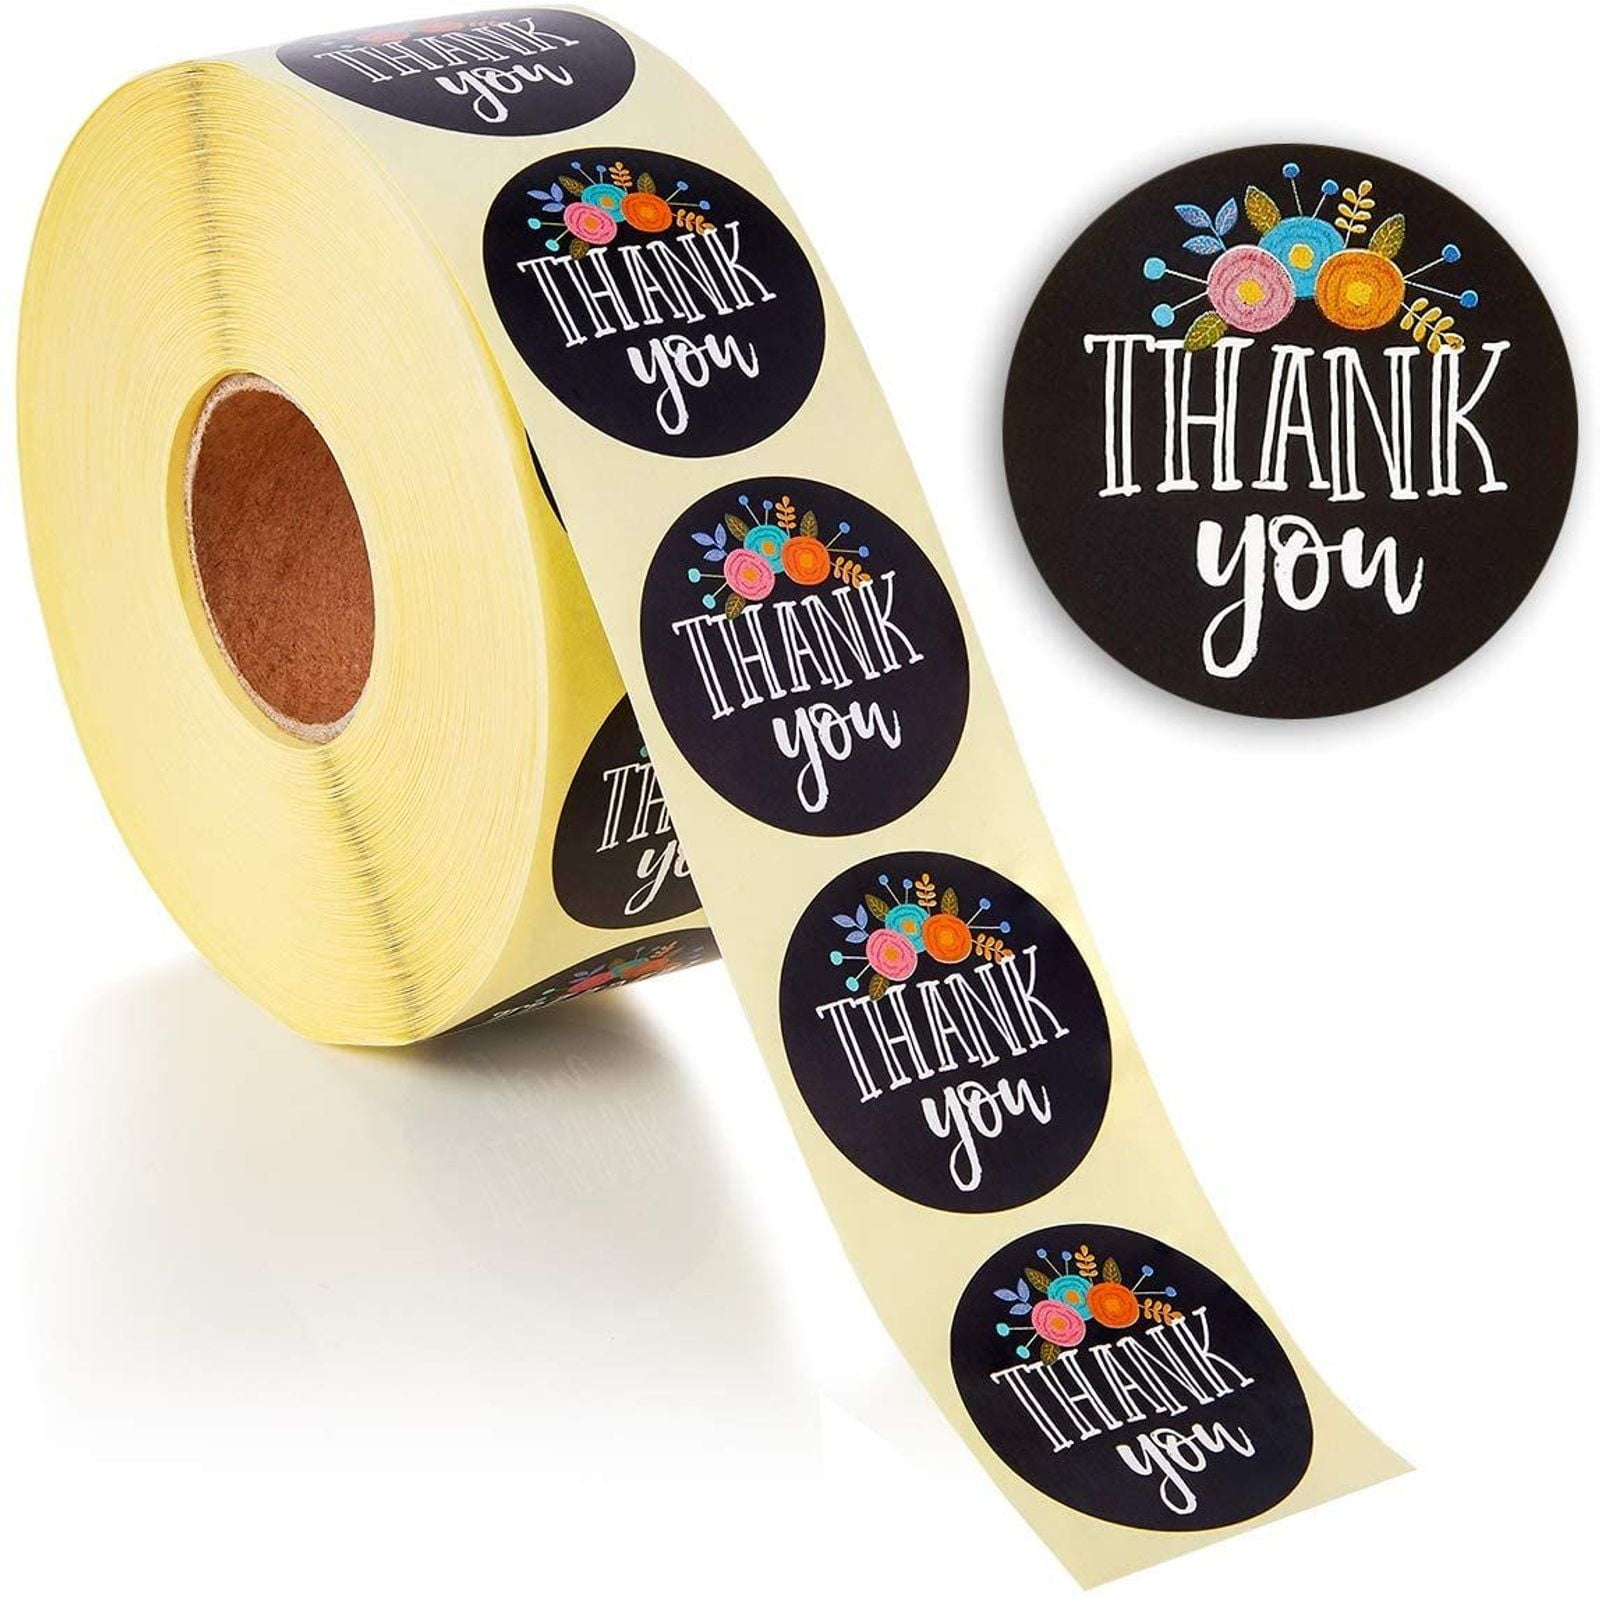 Thank You Floral Stickers Gift Sealing Labels Scrapbooking Self Adhesive Sticker 